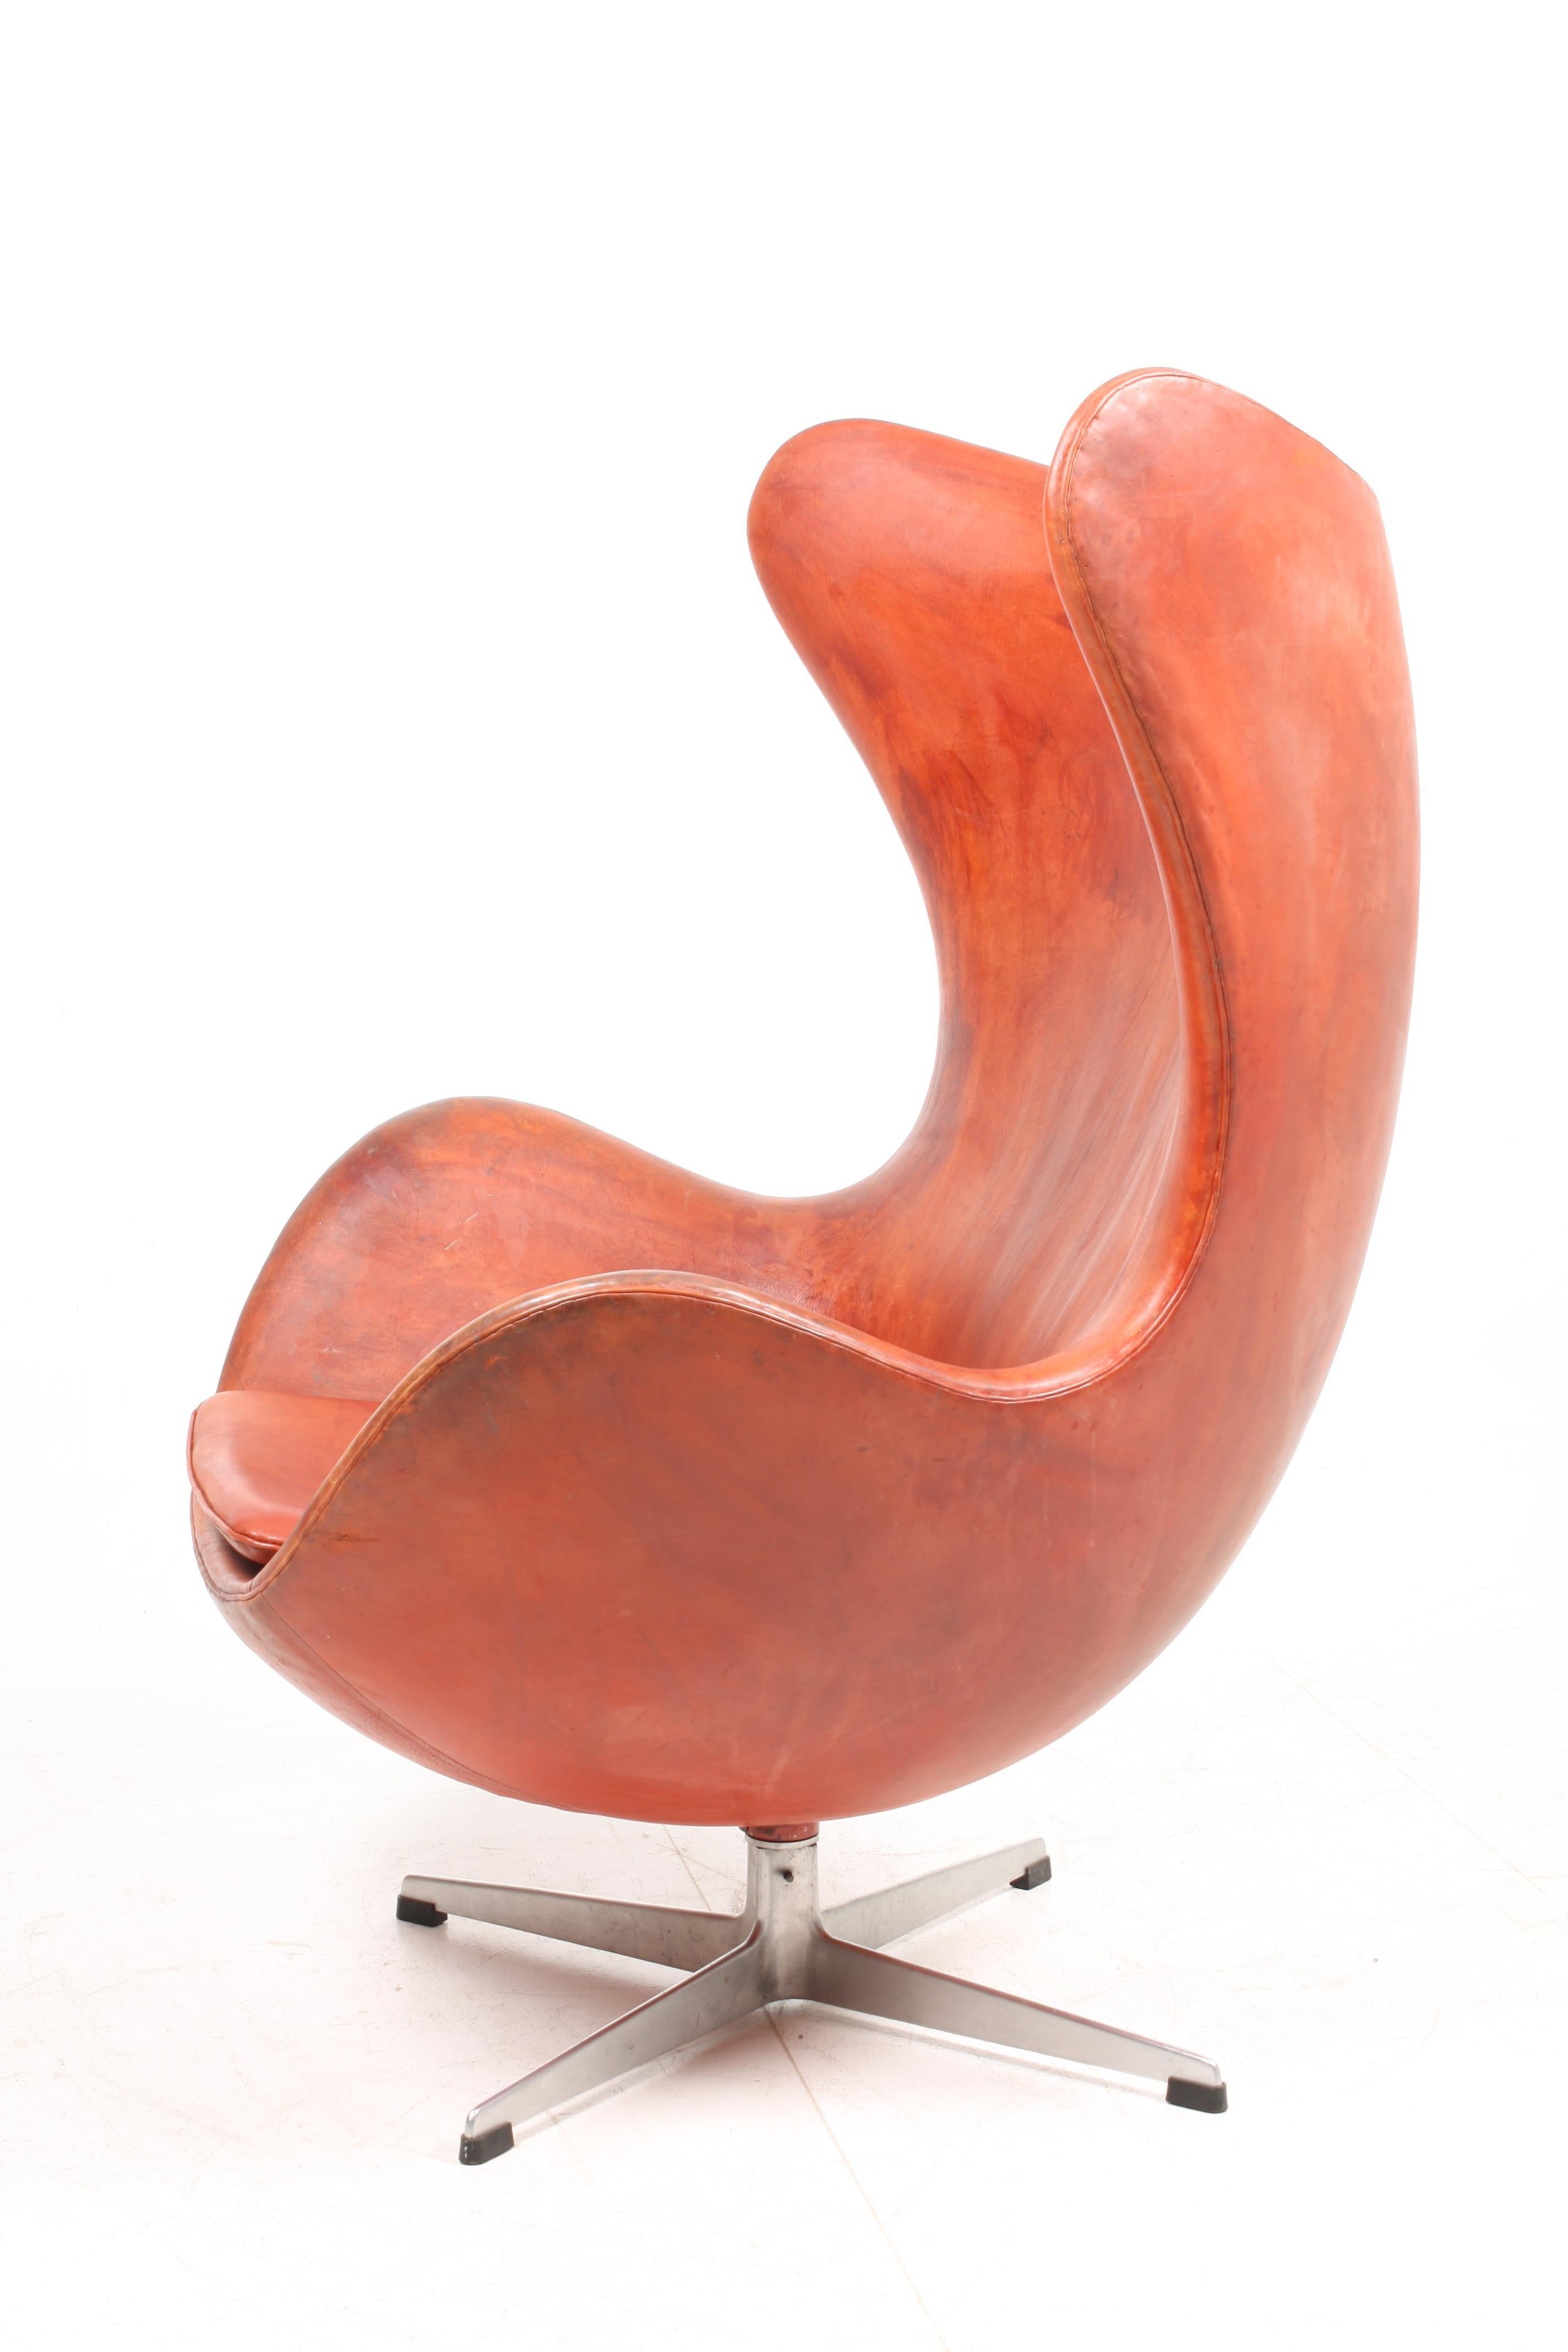 Scandinavian Modern Midcentury Egg Chair in Patinated Leather by Arne Jacobsen, Danish, 1960s